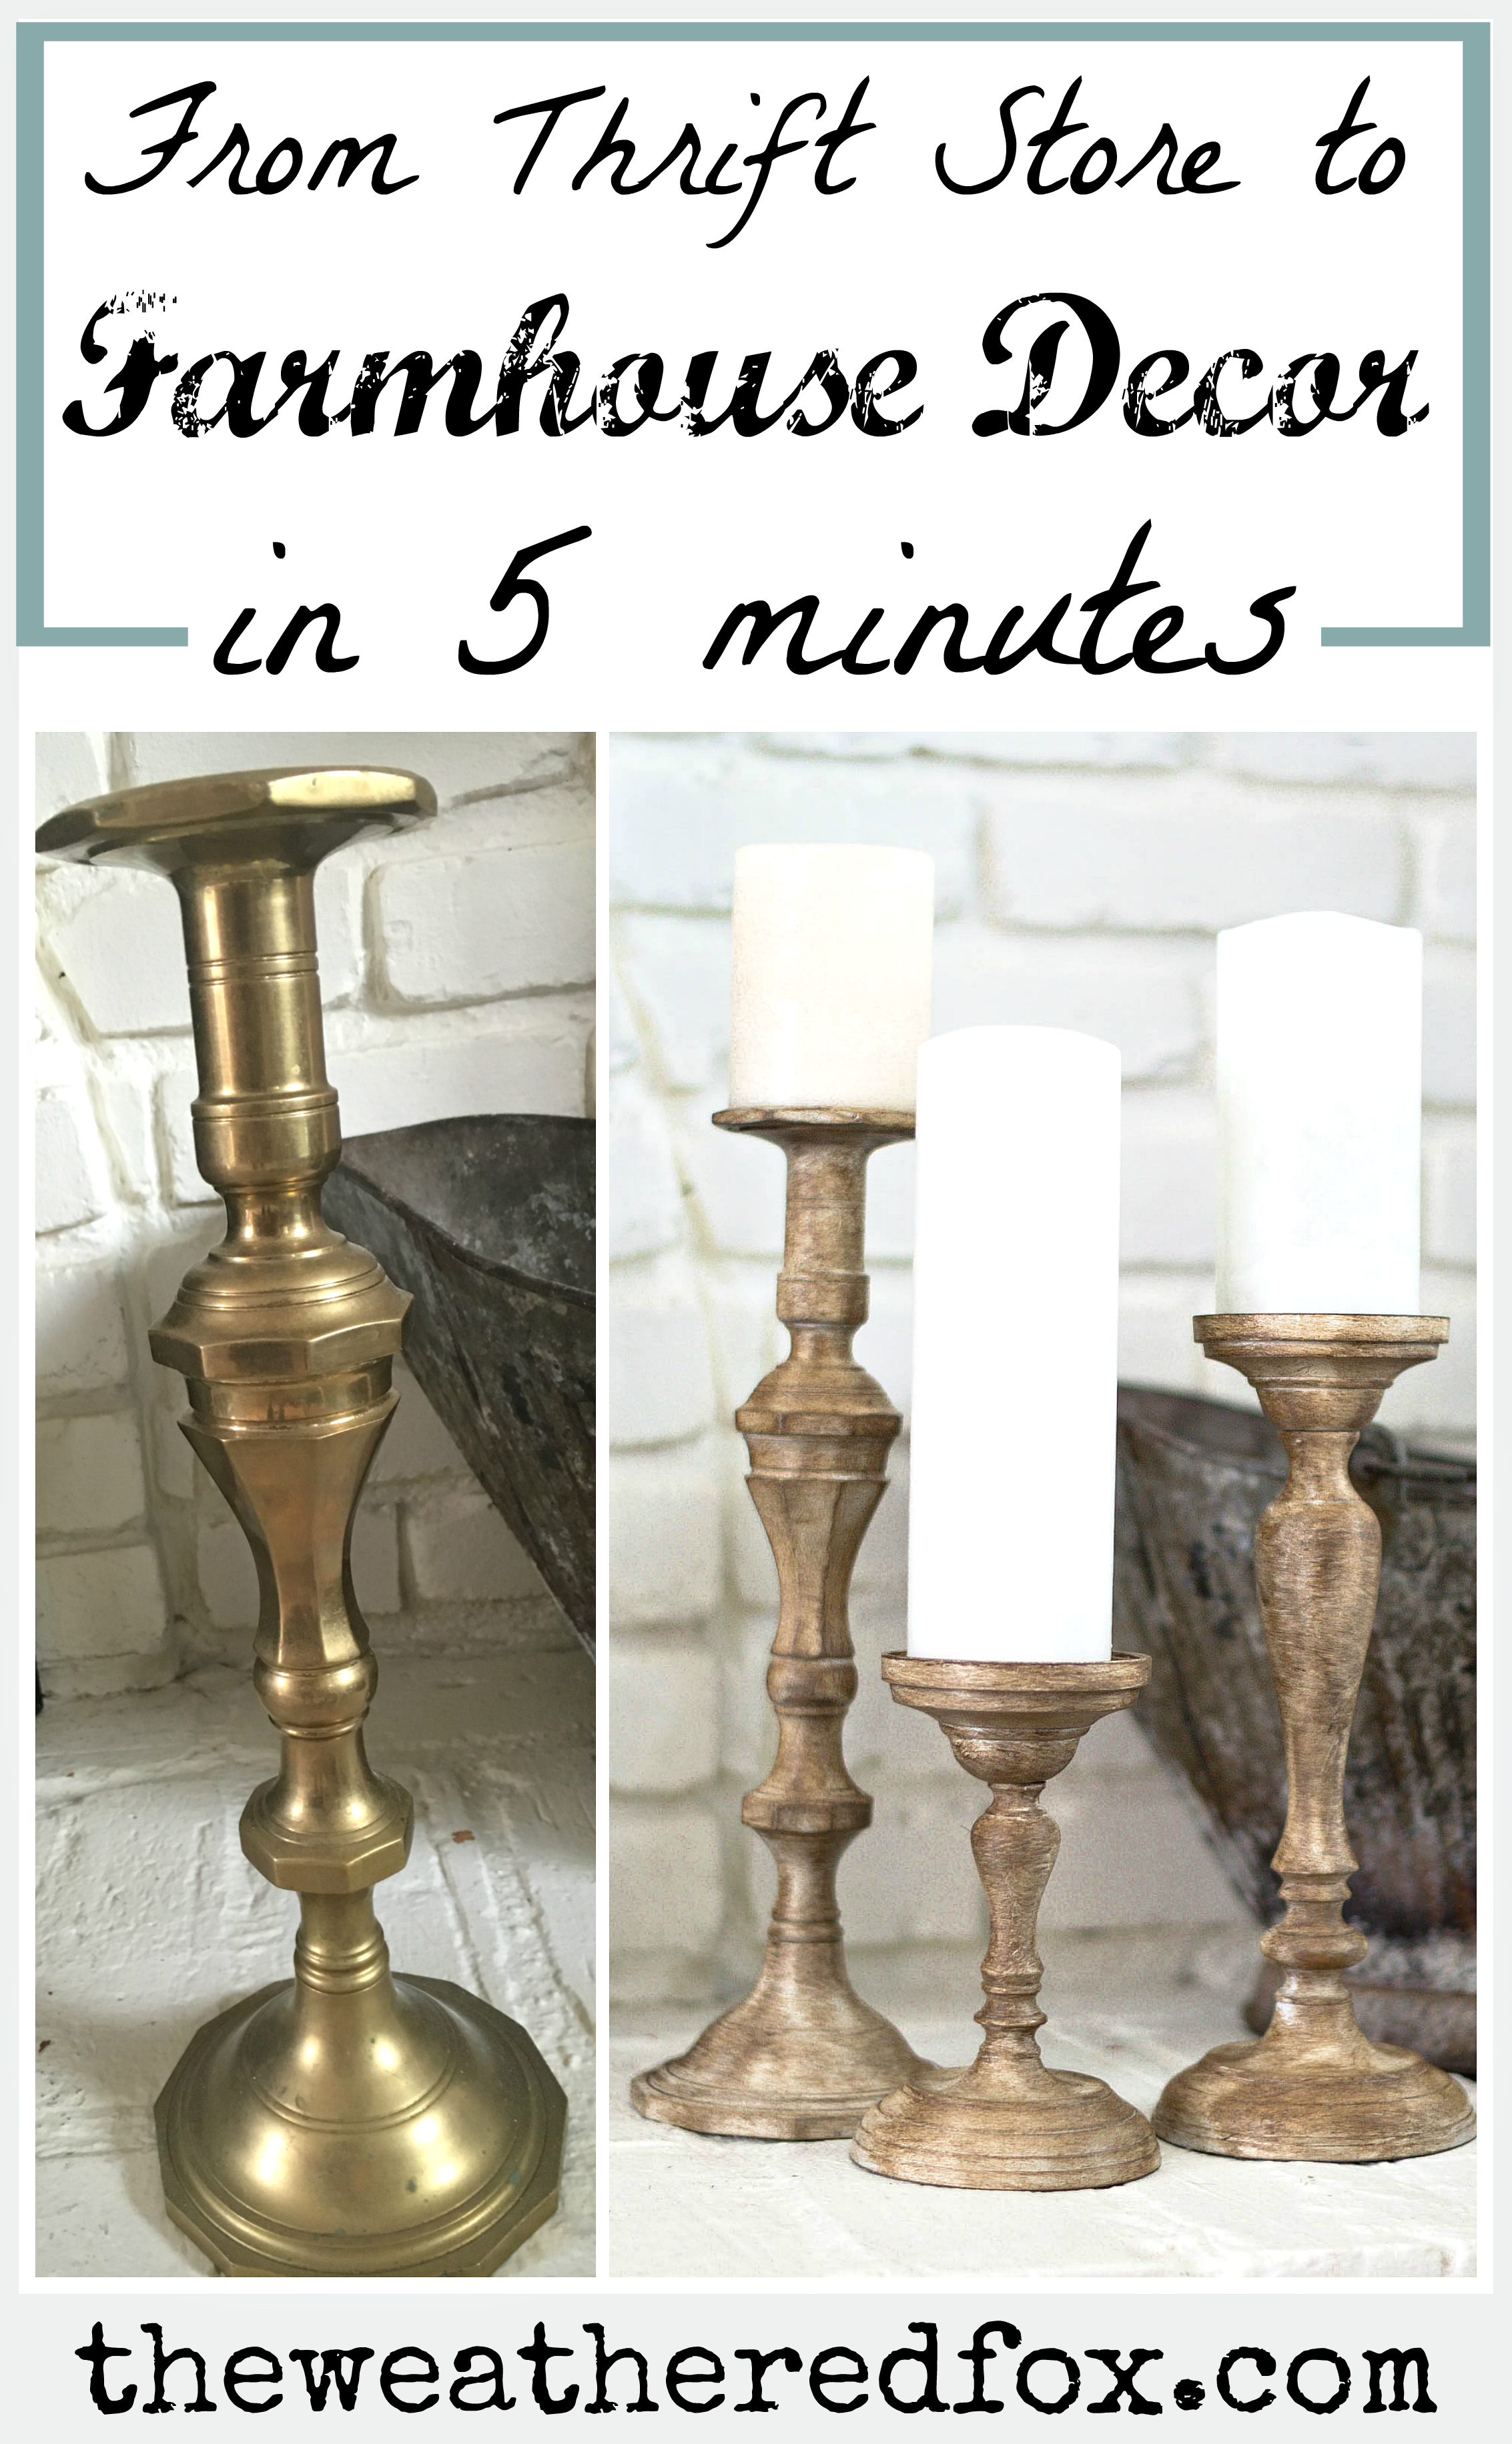 turn inexpensve thrifted candlesticks into gorgeous wood farmhouse candlesticks in 5 minutes!